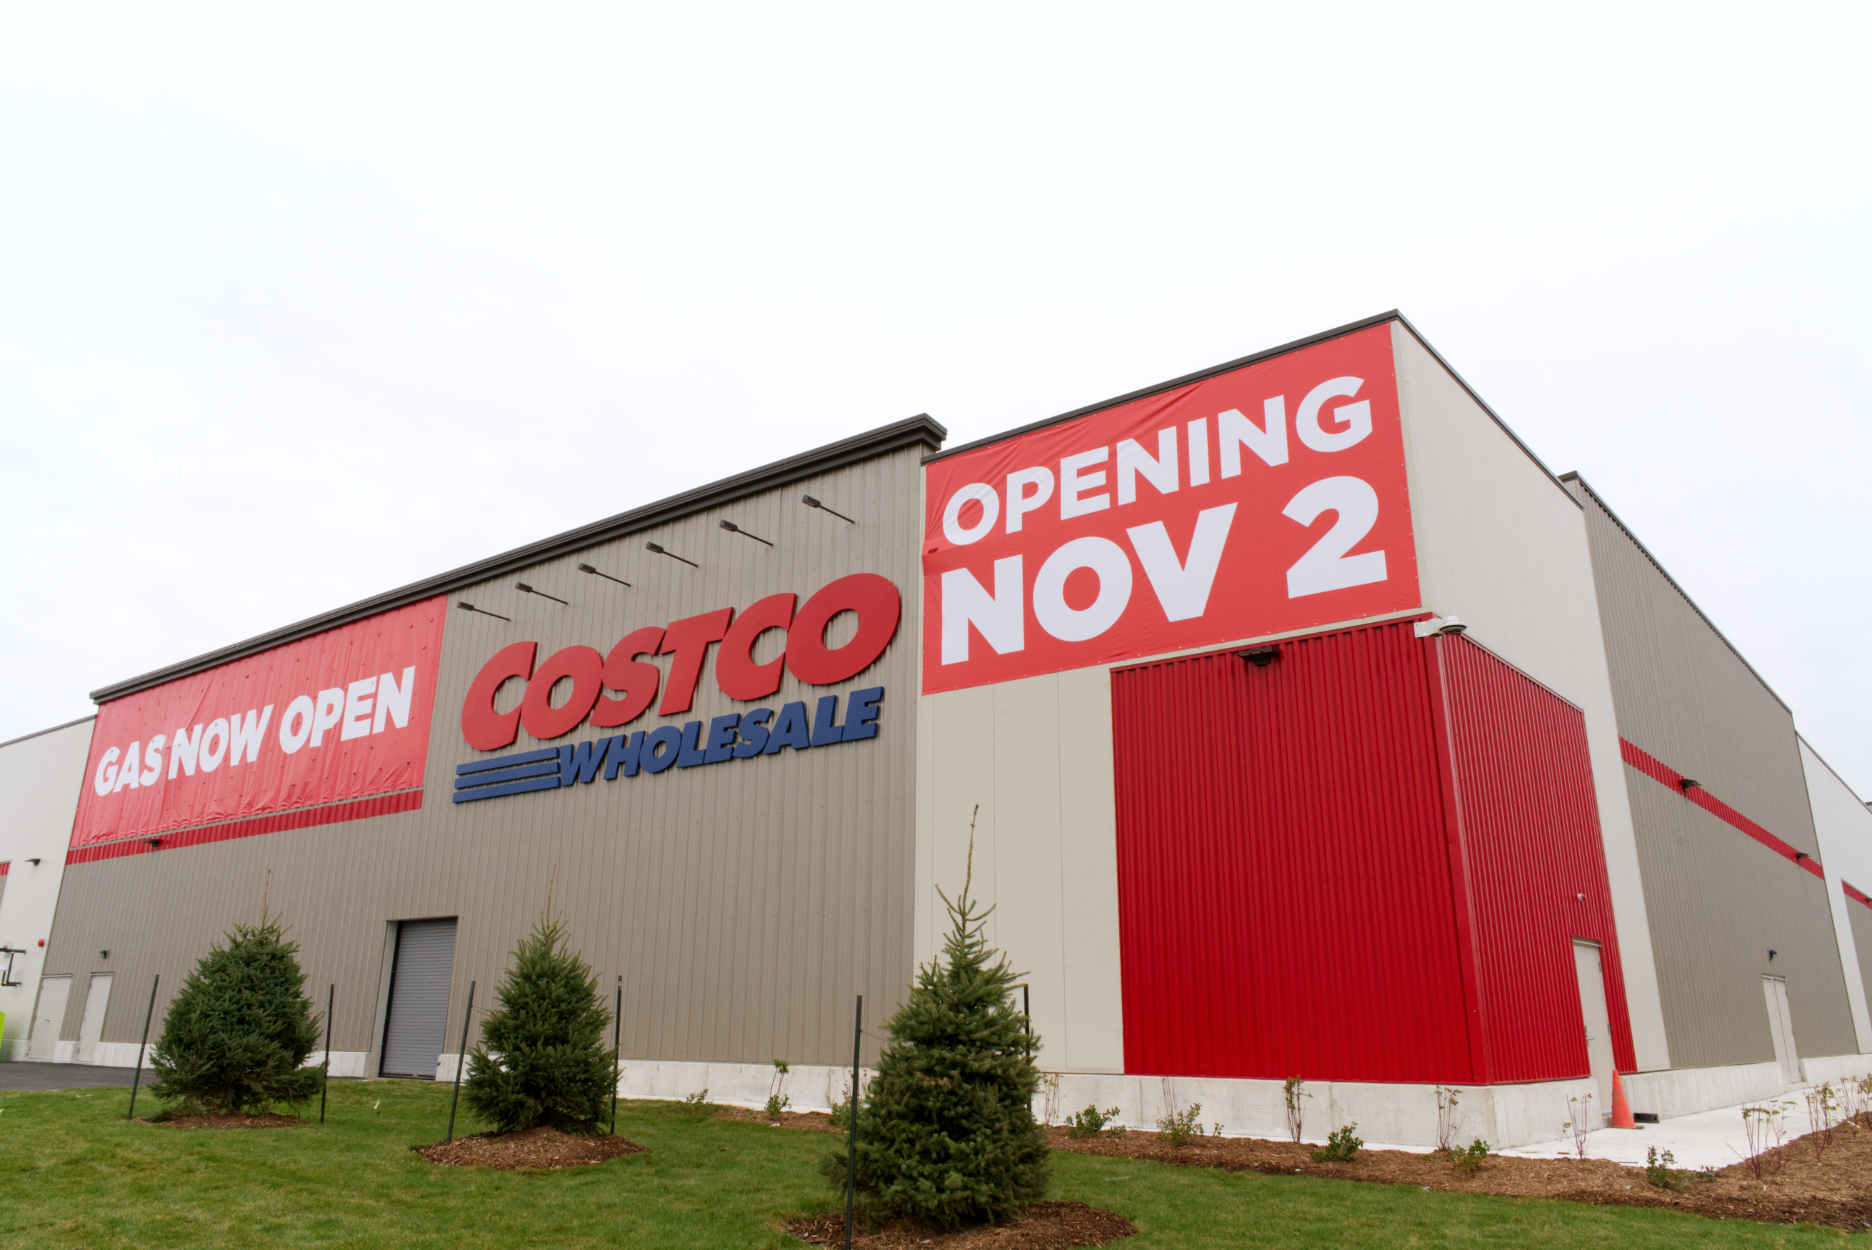 City council approves rezoning and final plat for Metro's third Costco